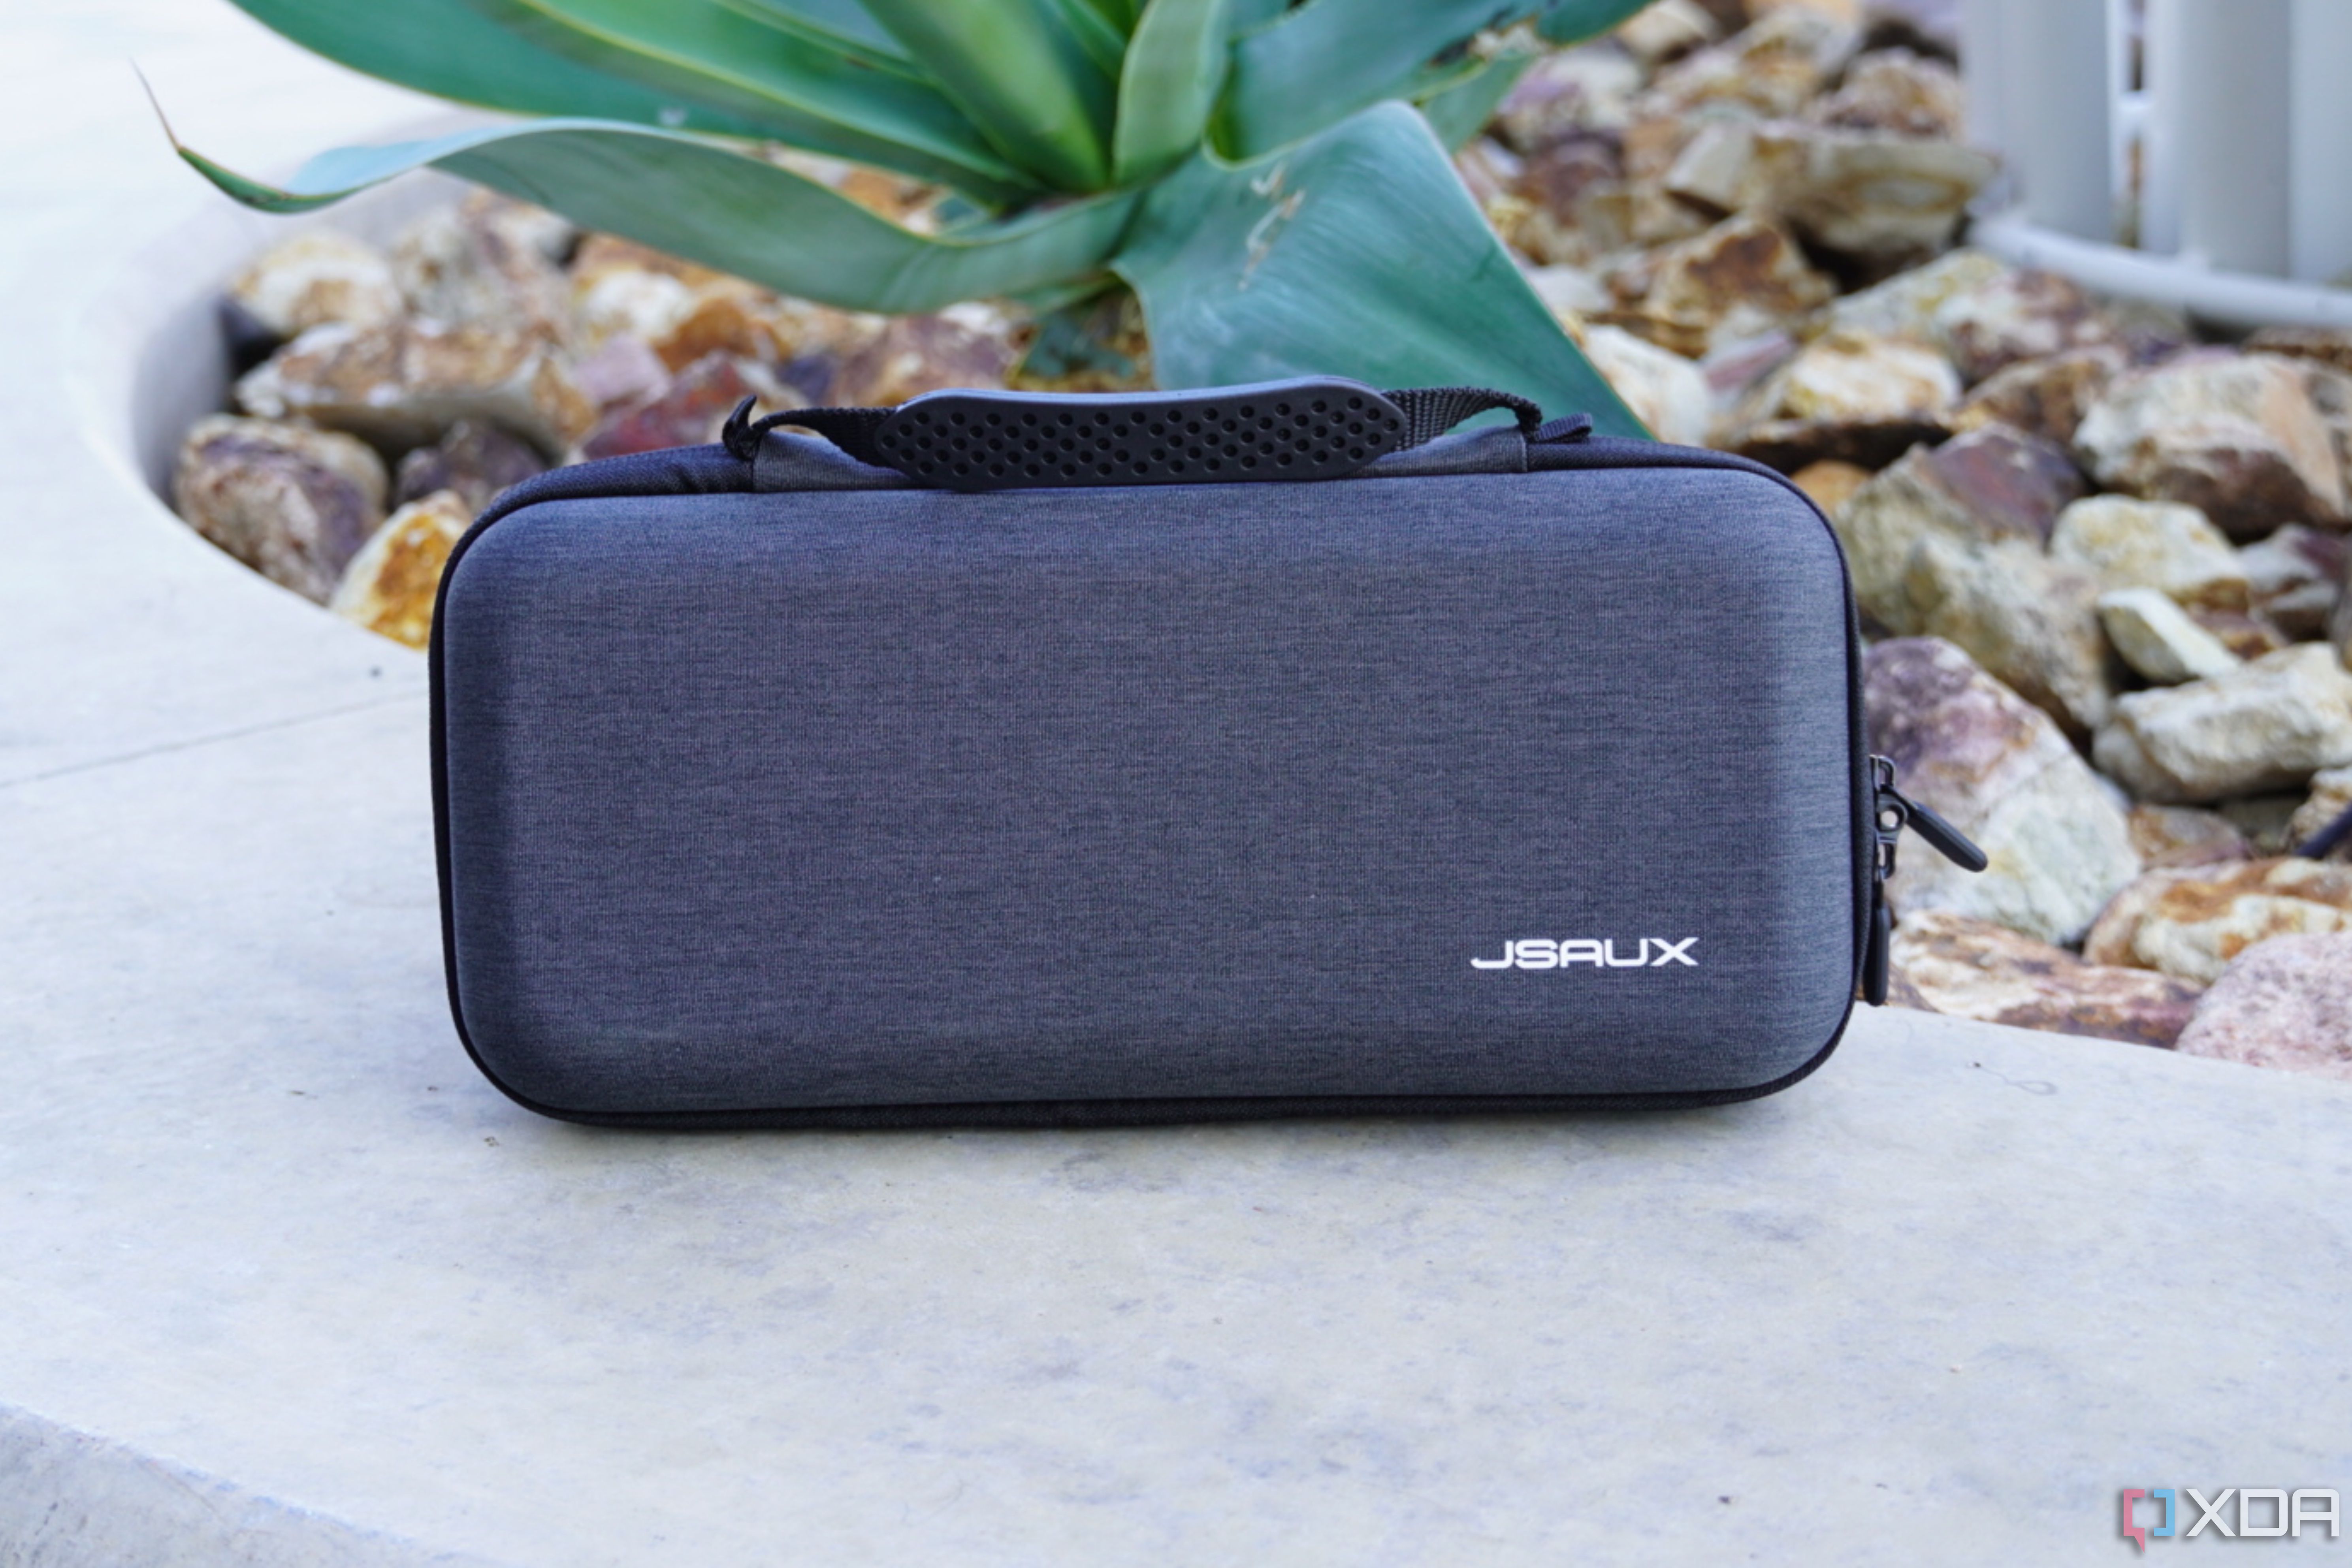 The Jsaux carrying case for gaming handhelds. 